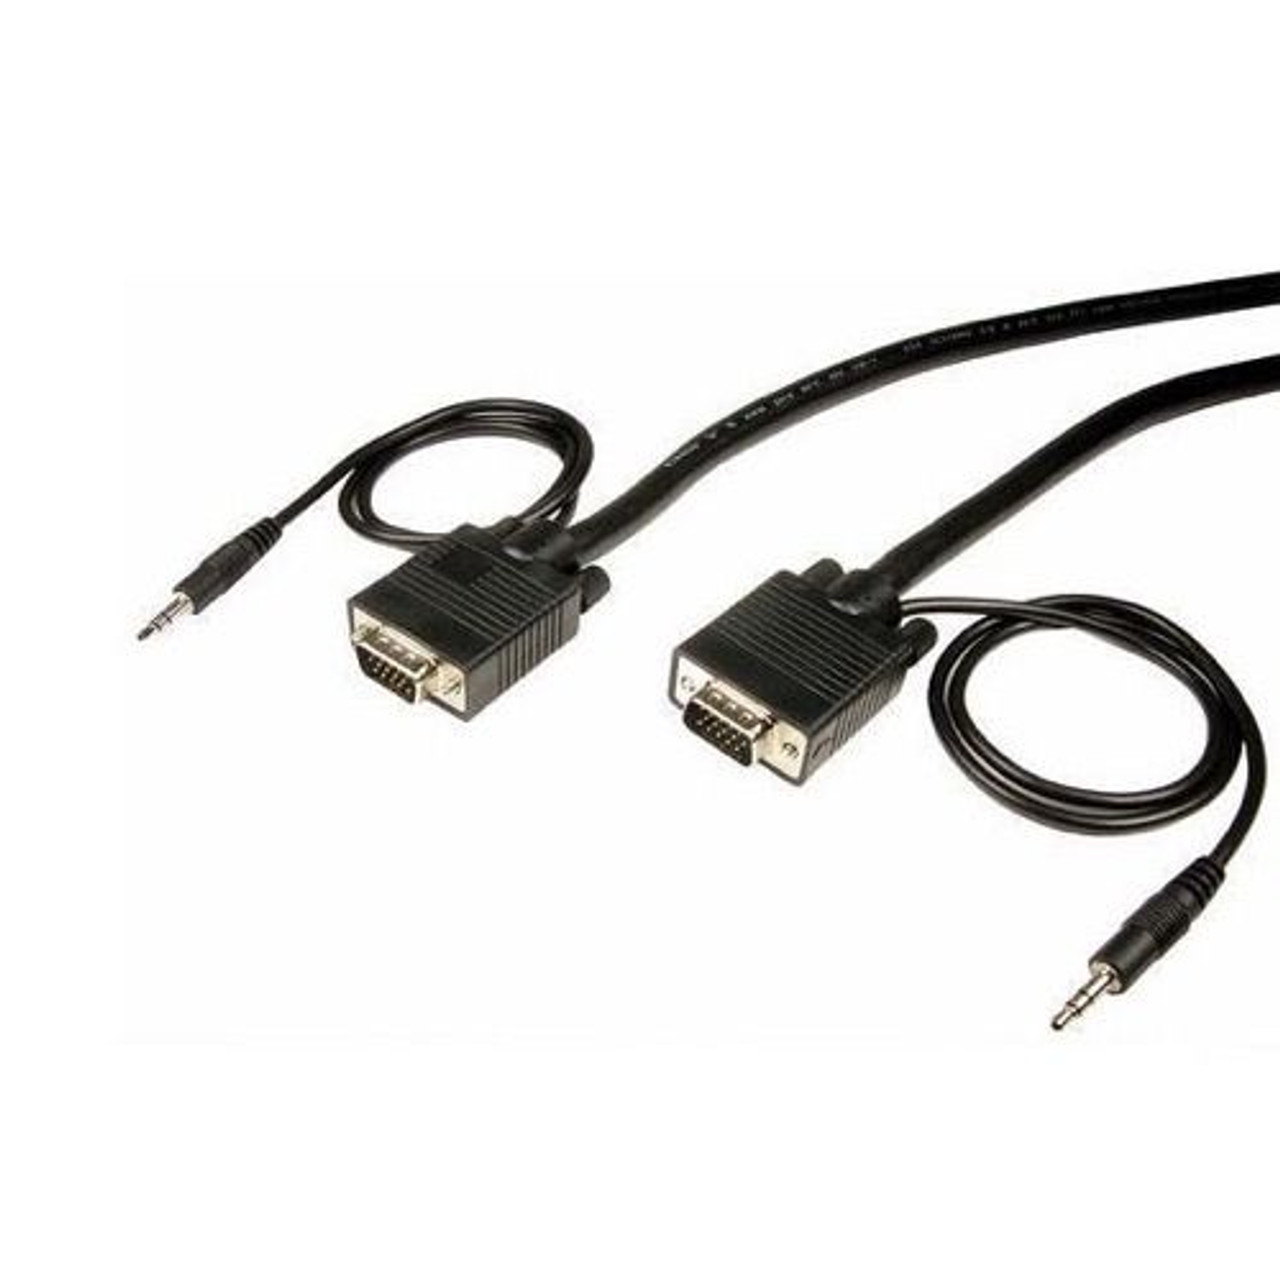 Steren 253-206BK 6' FT SVGA HD15 3.5mm Stereo Cable Shielded PC Laptop to Projector Video Display Monitor Cable Audio Male Mini Phone Data Transfer Interconnect Computer Cable, Part # 253206-BK